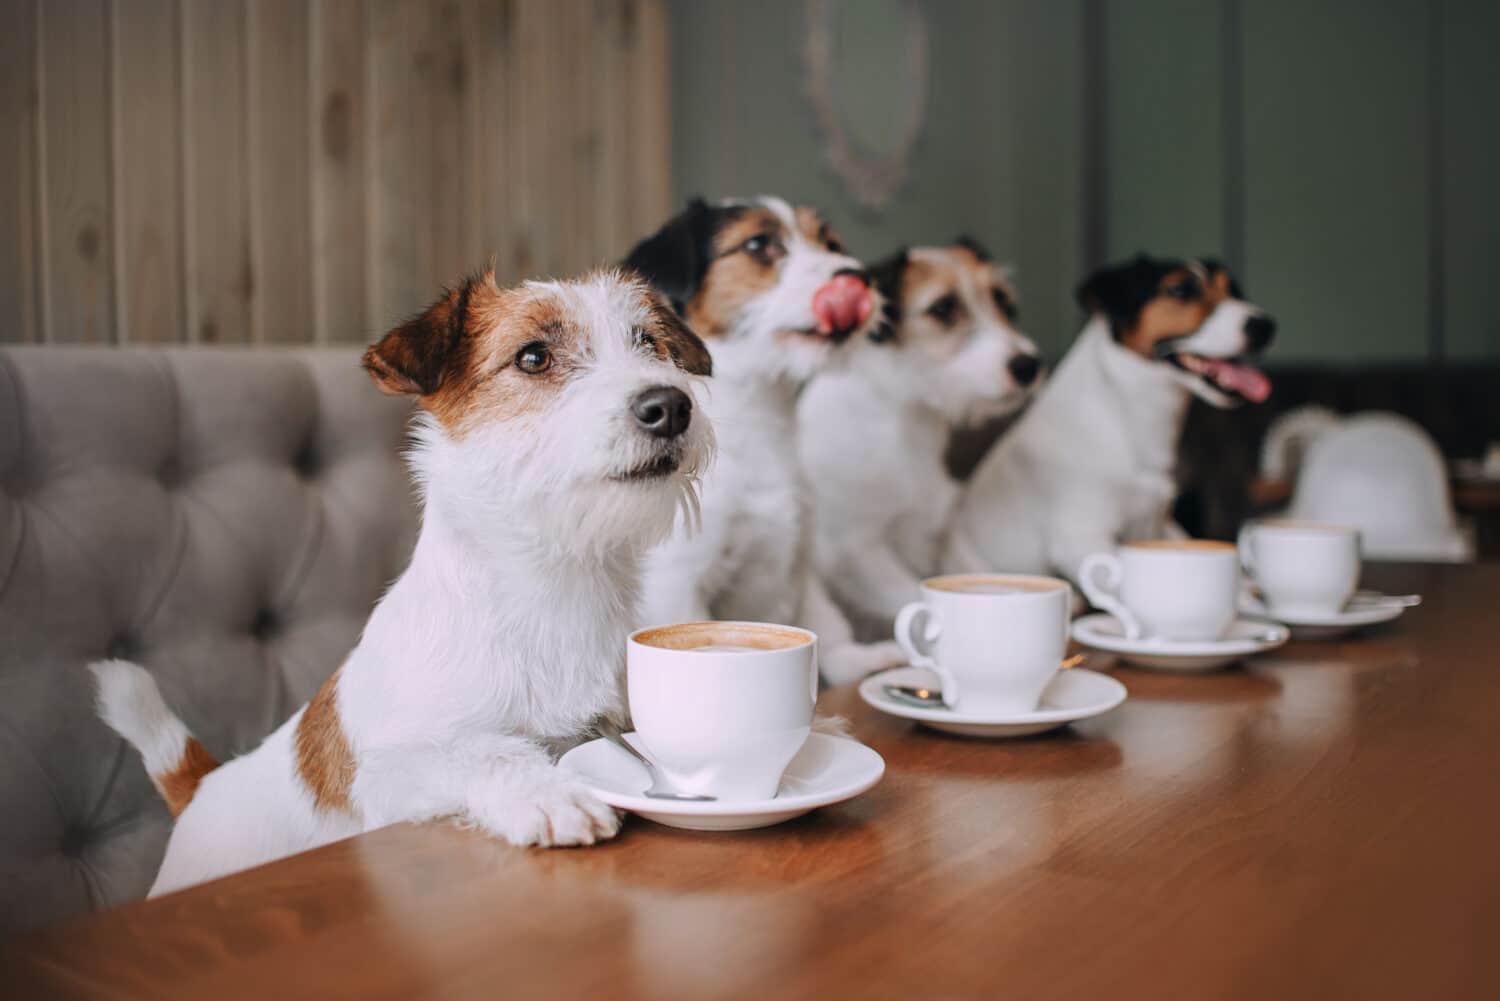 Four jack russell terriers sitting in front of cups in cafe